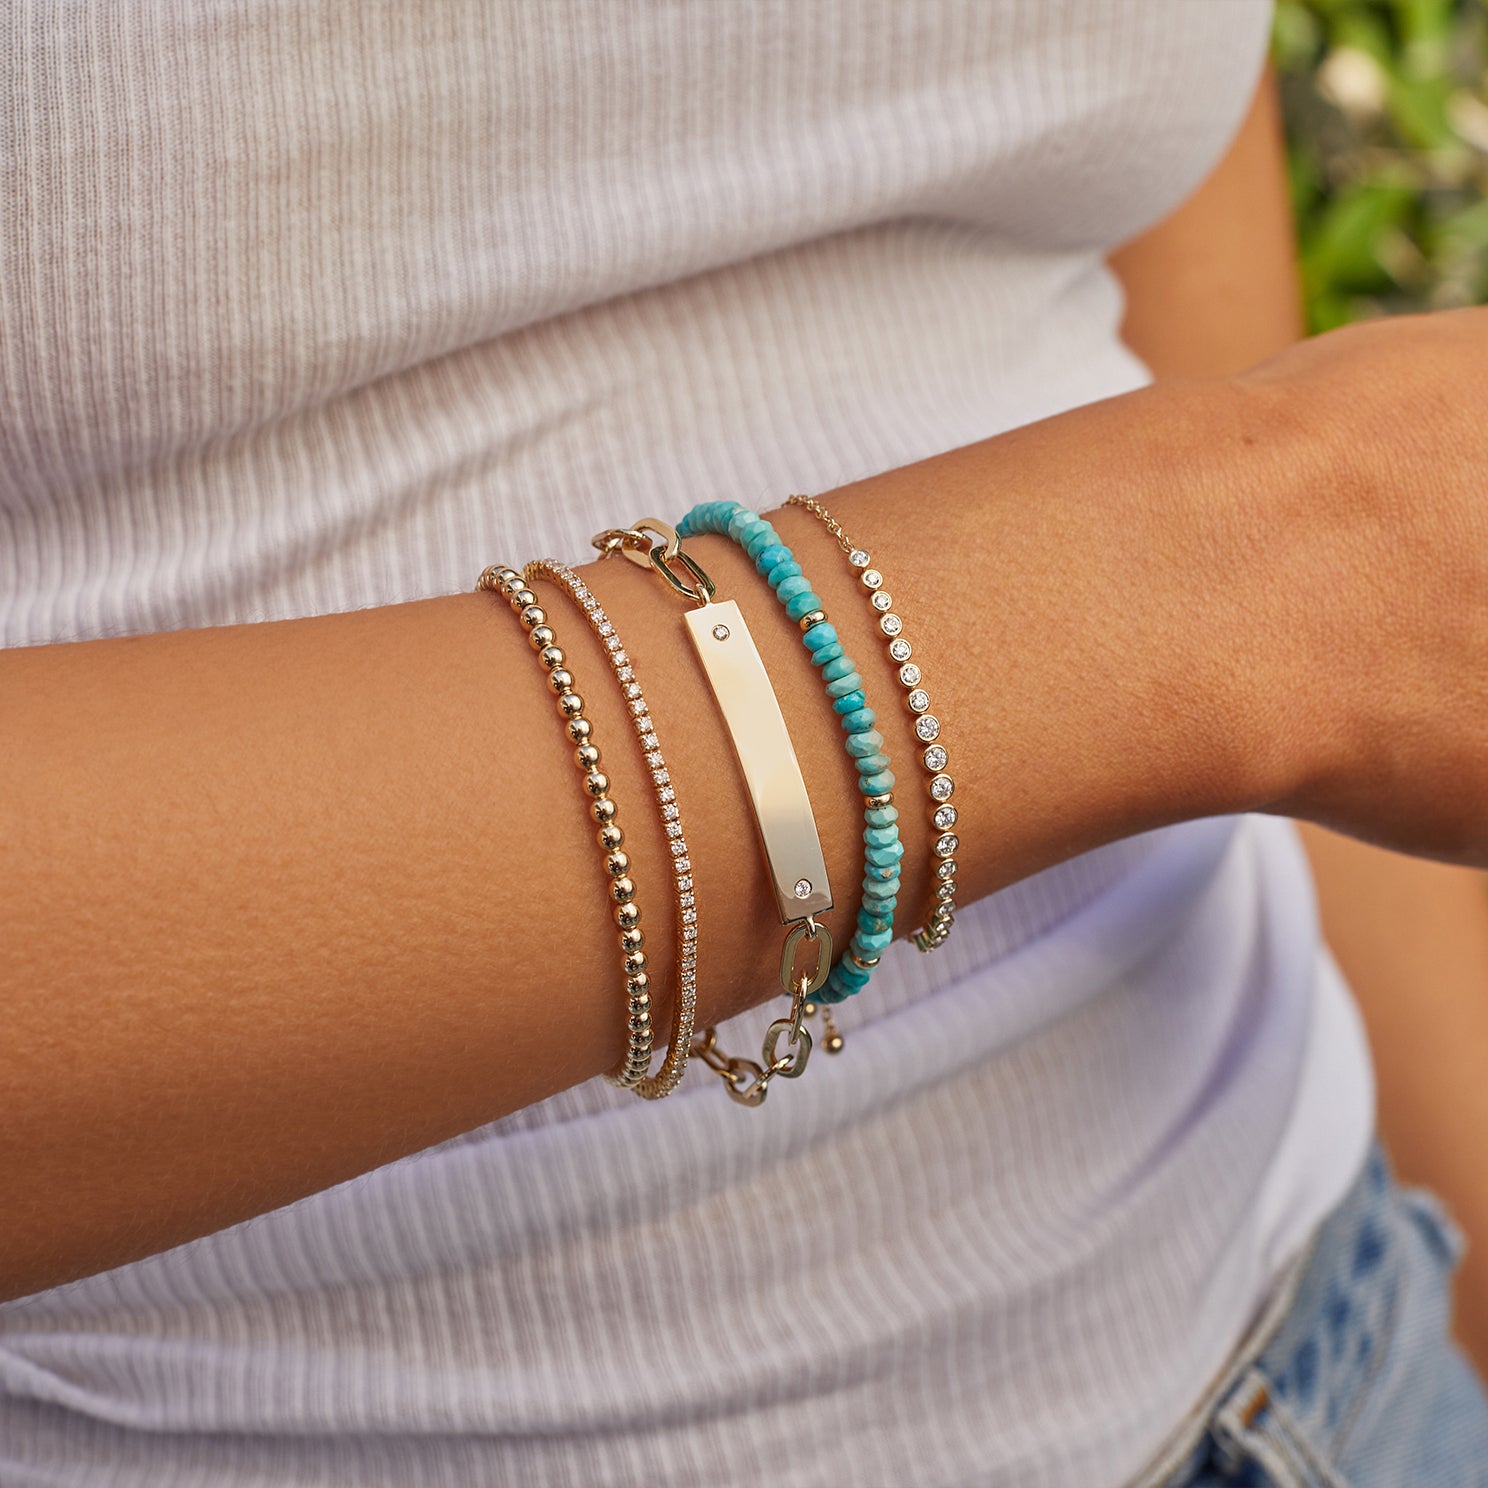 Birthstone Bead Bracelet In Turquoise styled on wrist with two diamond bracelets, one gold ball bracelet, and one chain nameplace bracelet